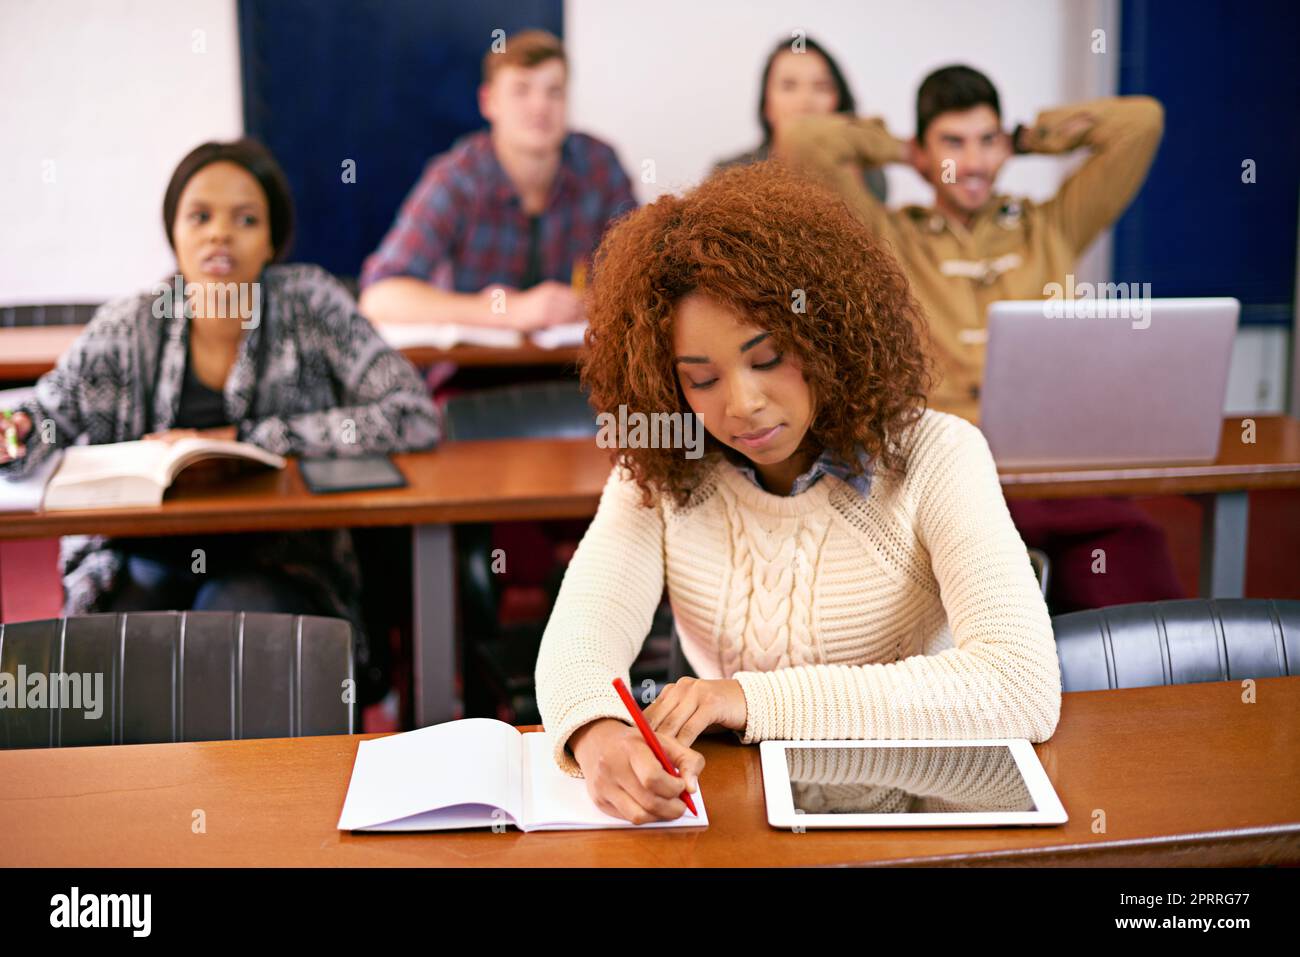 Focus and determination to take her to the top. a student working at her desk in class with a digital tablet. Stock Photo